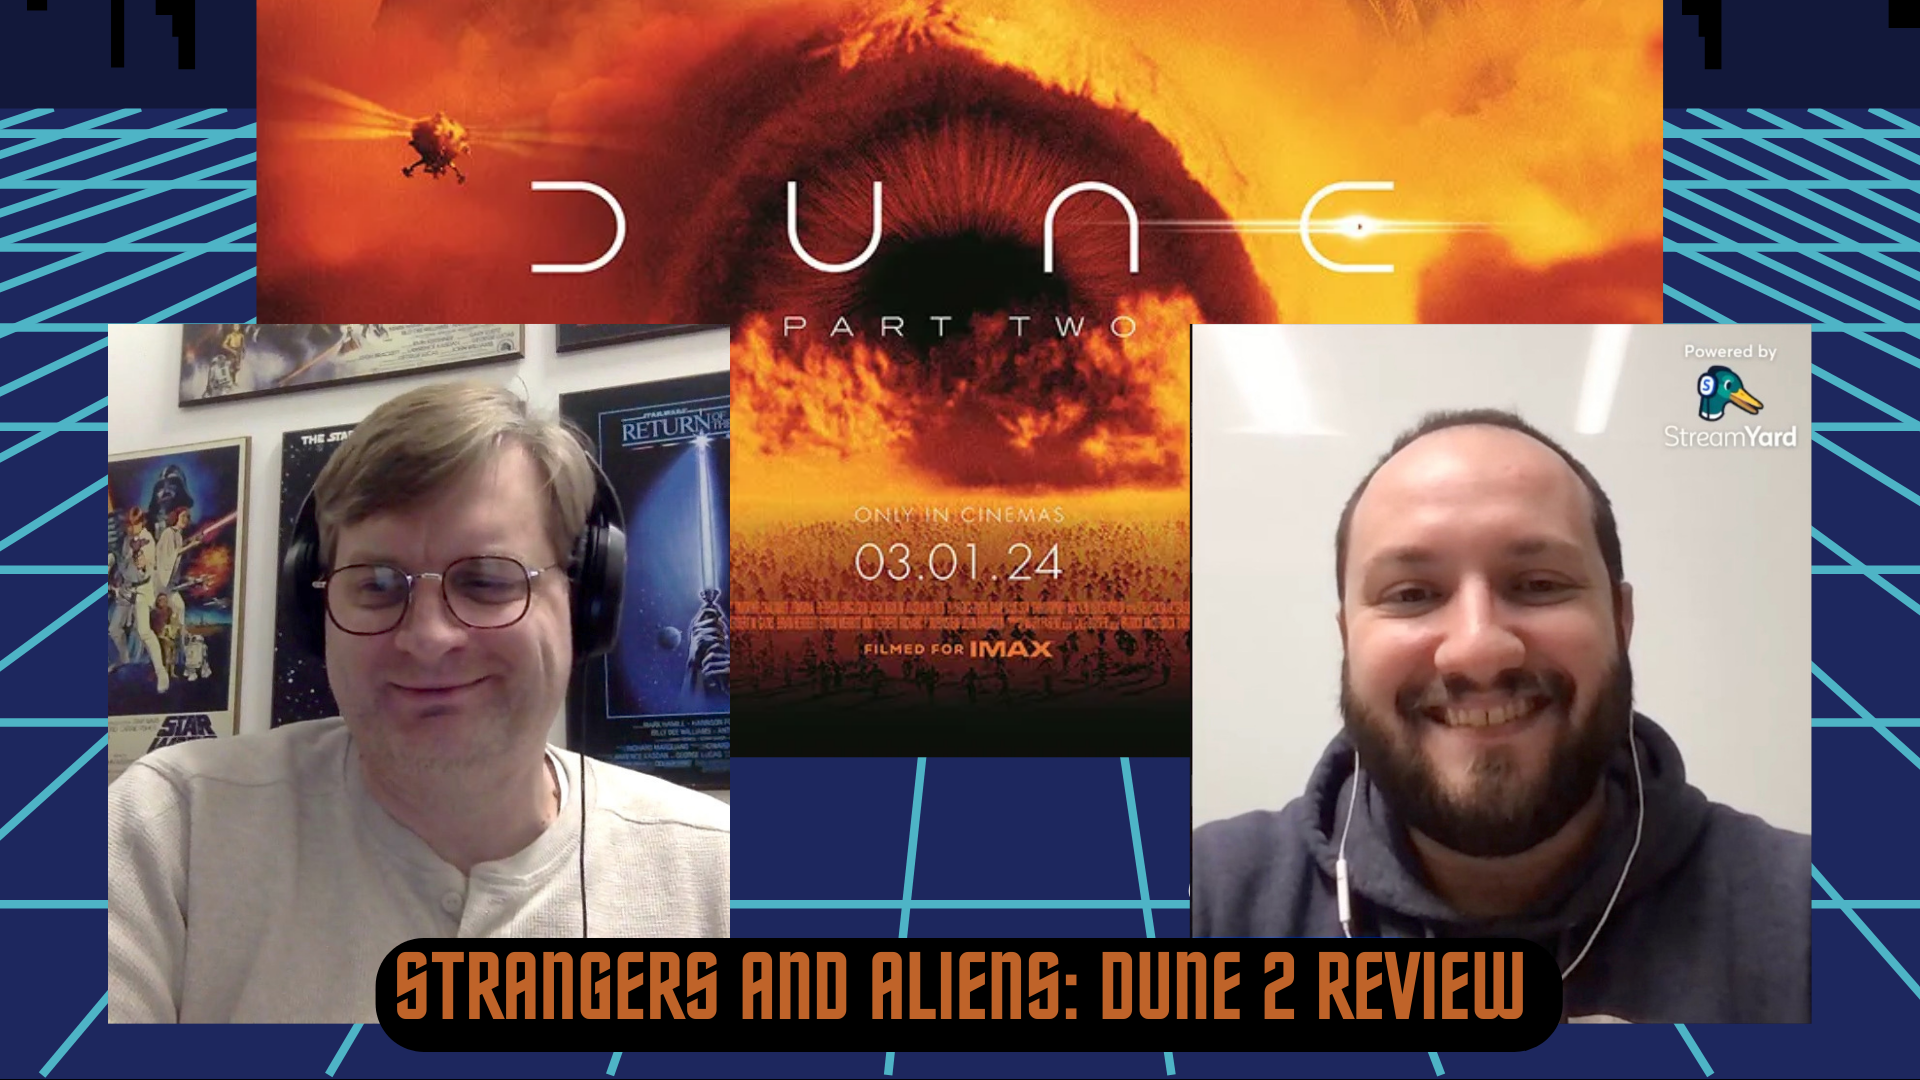 DUNE PART TWO REVIEW